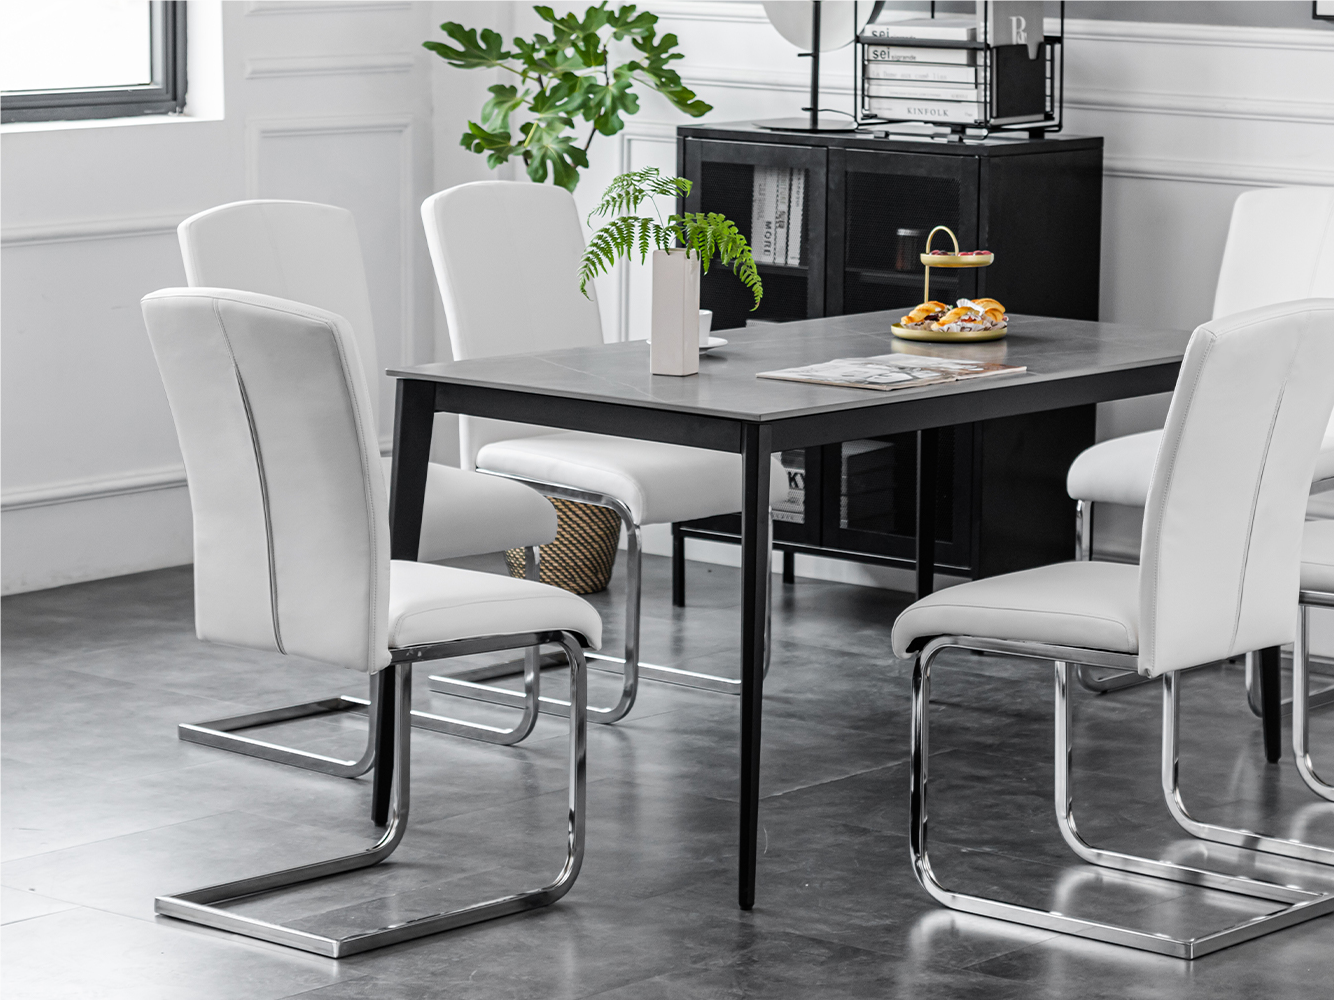 Top 3 reasons you need comfortable dining room chairs